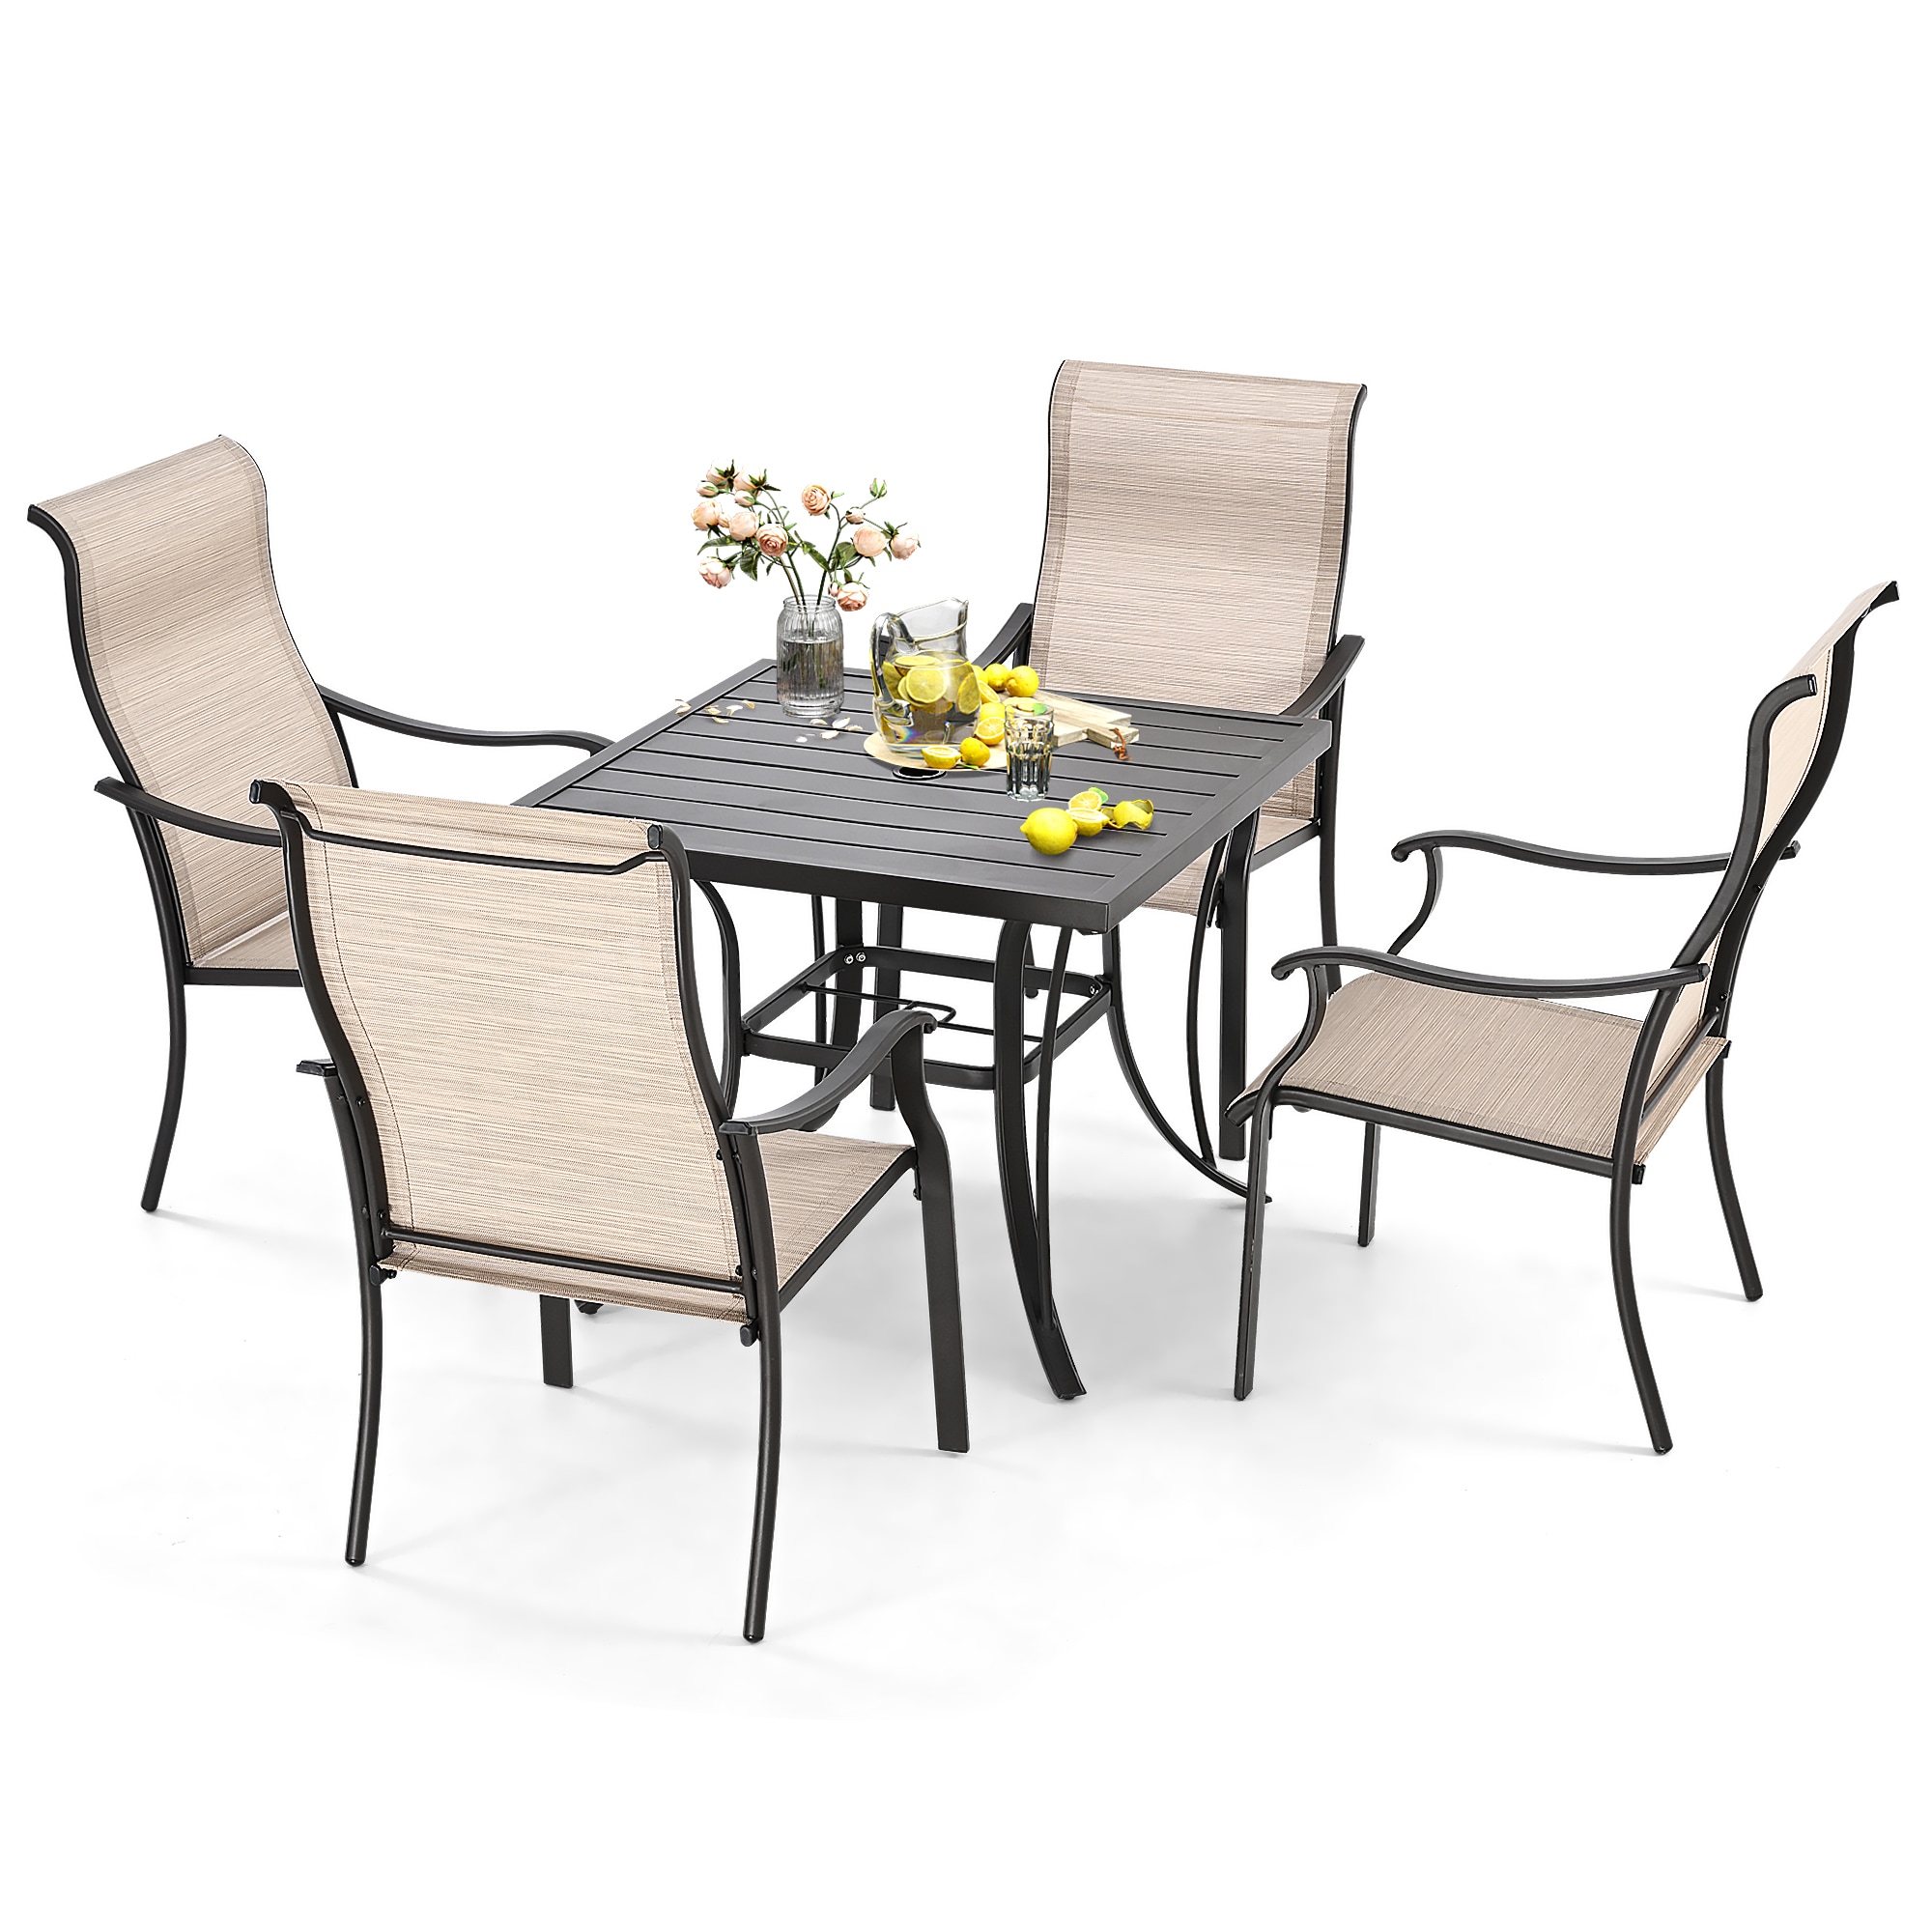 Clearance Lowes Home Improvement Store - Patio Furniture Clearance - Ending  Summer Sale Deals 